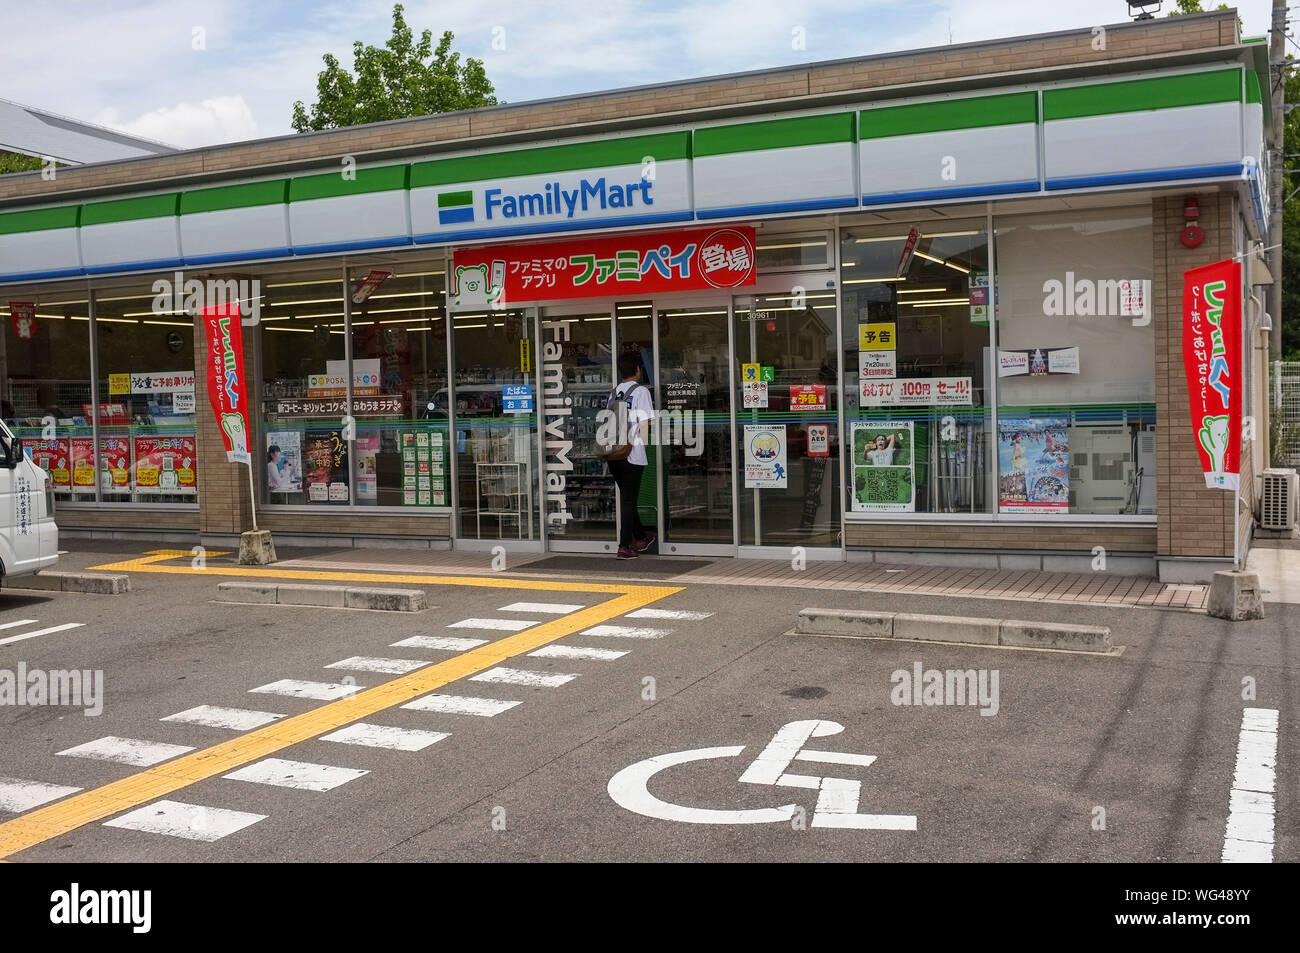 Family Mart convenience store in Osaka, Japan. FamilyMart is one of largest convenience shop franchise chain in Japan. Stock Photo